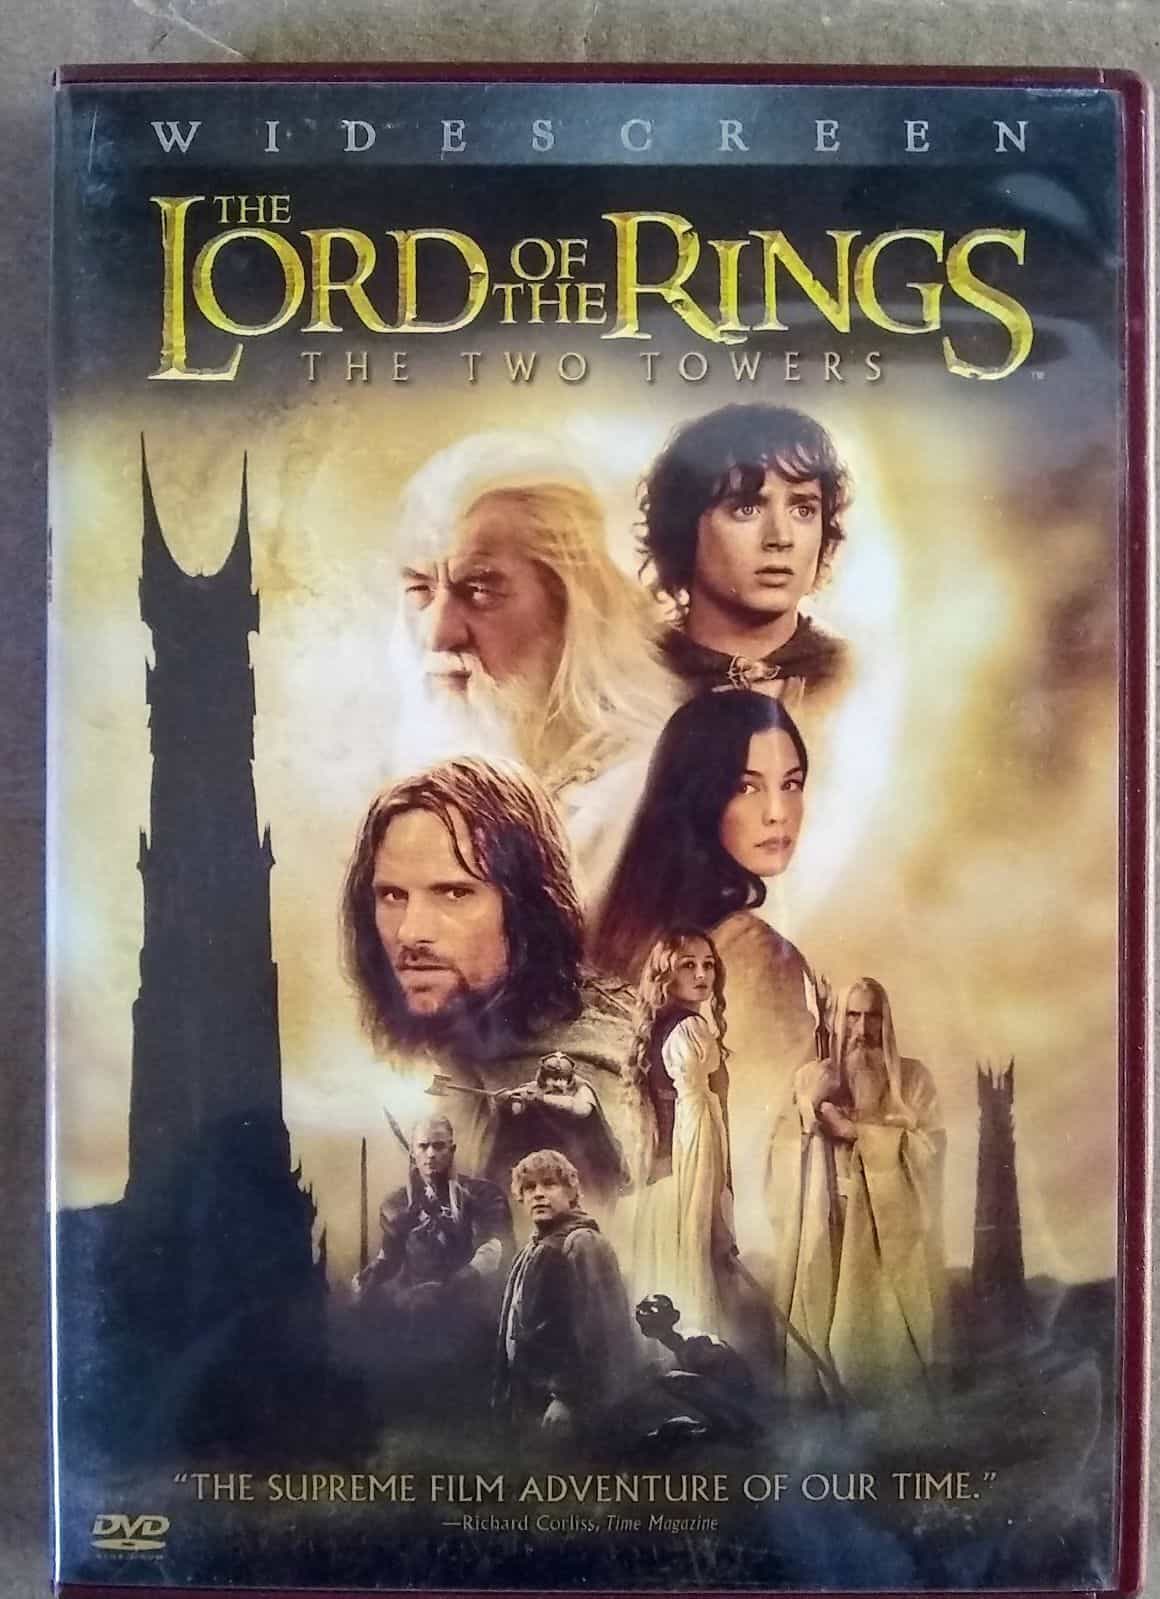 The Lord Of The Rings The Motion Picture Trilogy DVD set